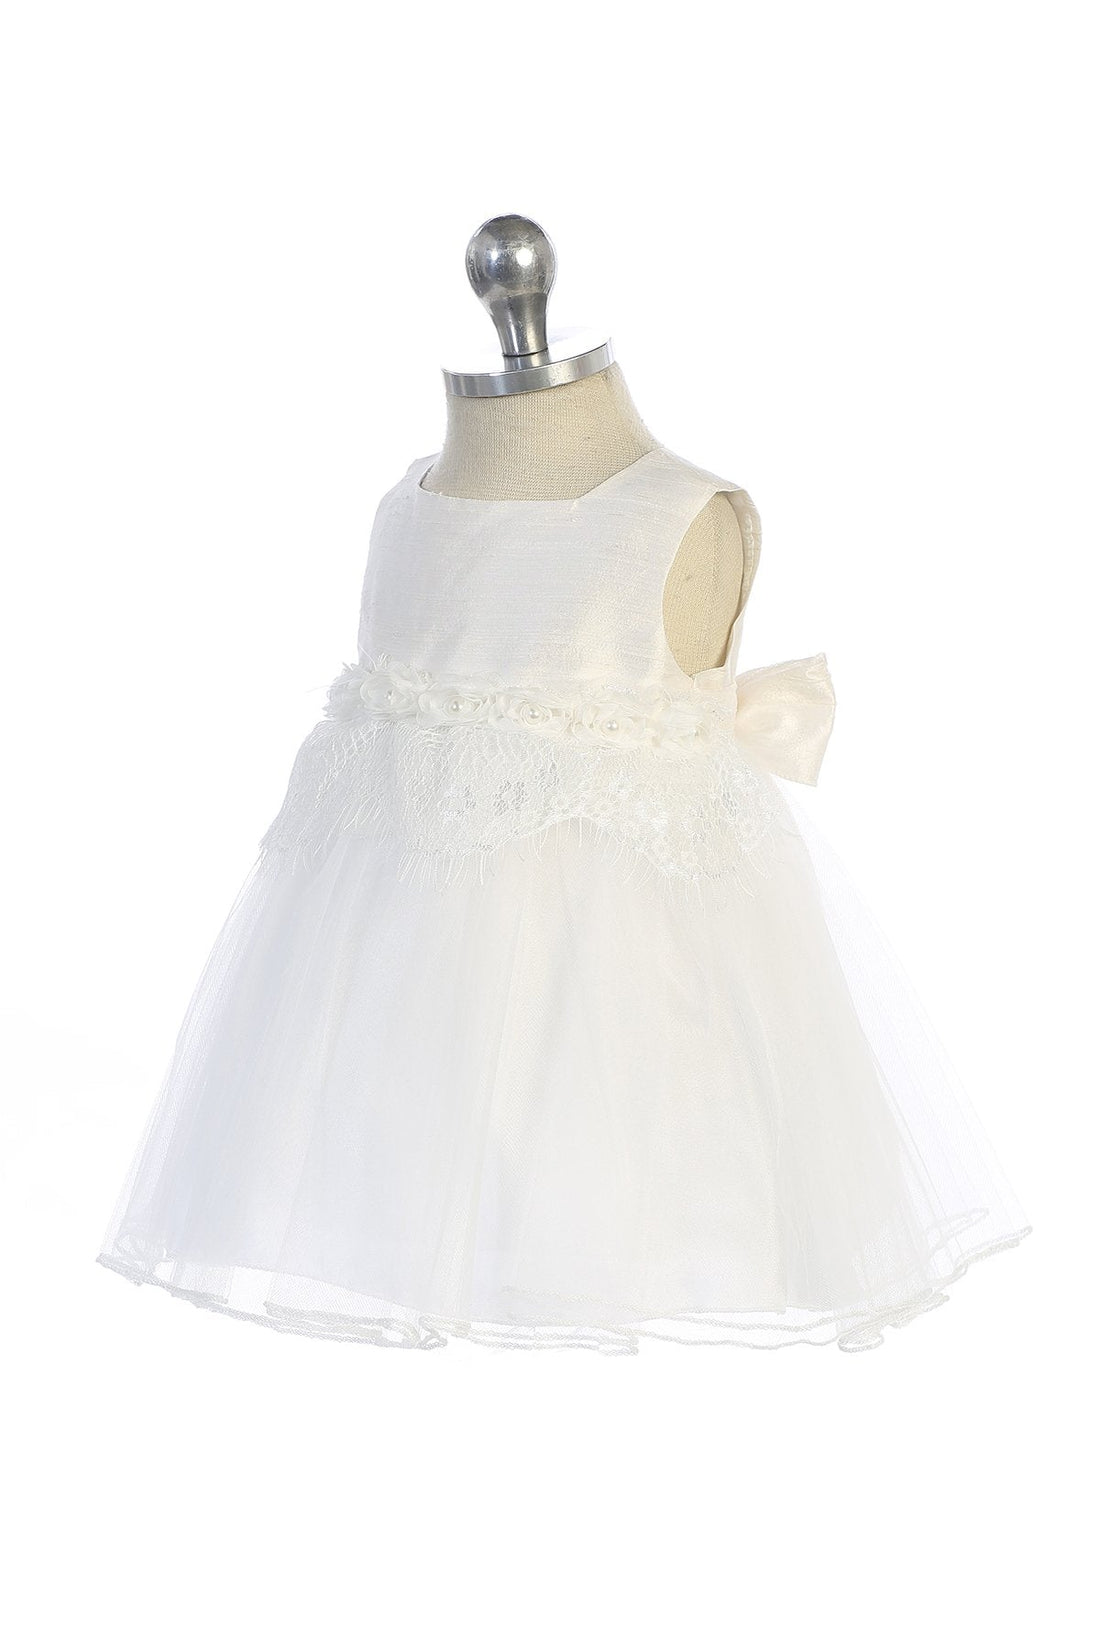 Off-White_2 Baby Lace Silk Pearl Party Dress-AS464